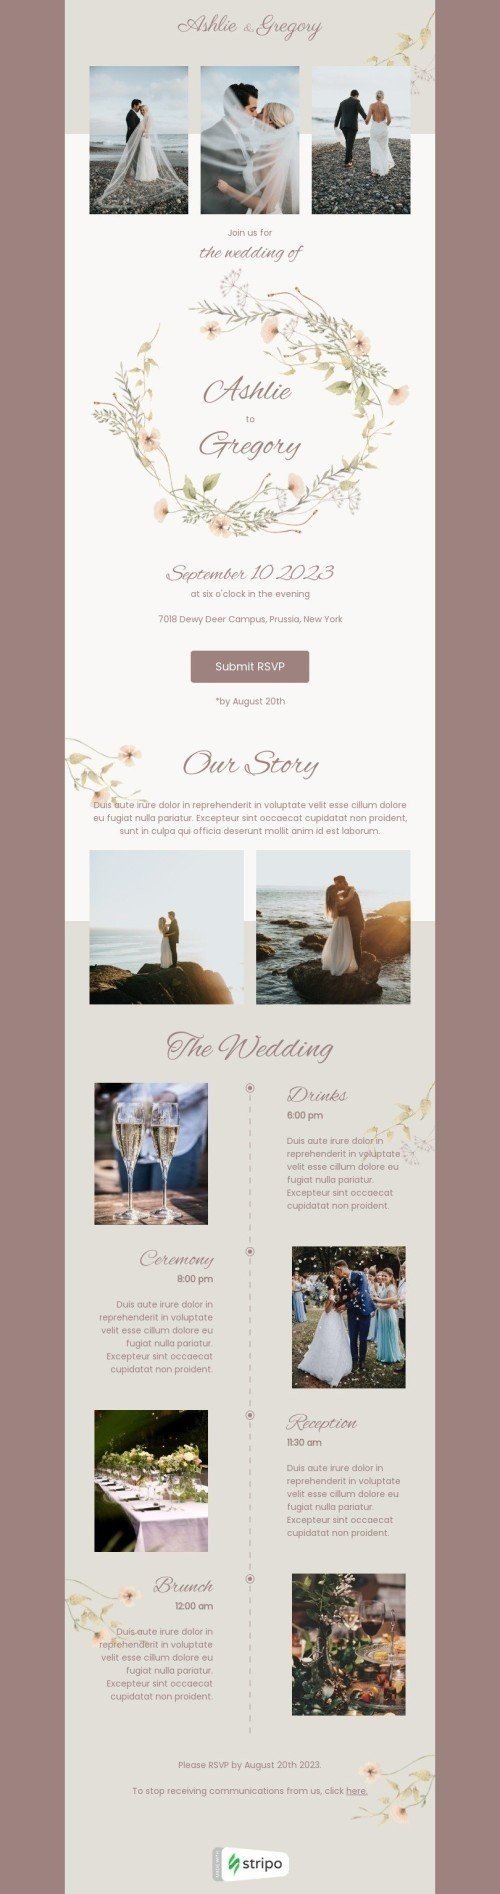 Wedding Invitation Email Template "Join us for the wedding" for Hobbies industry mobile view